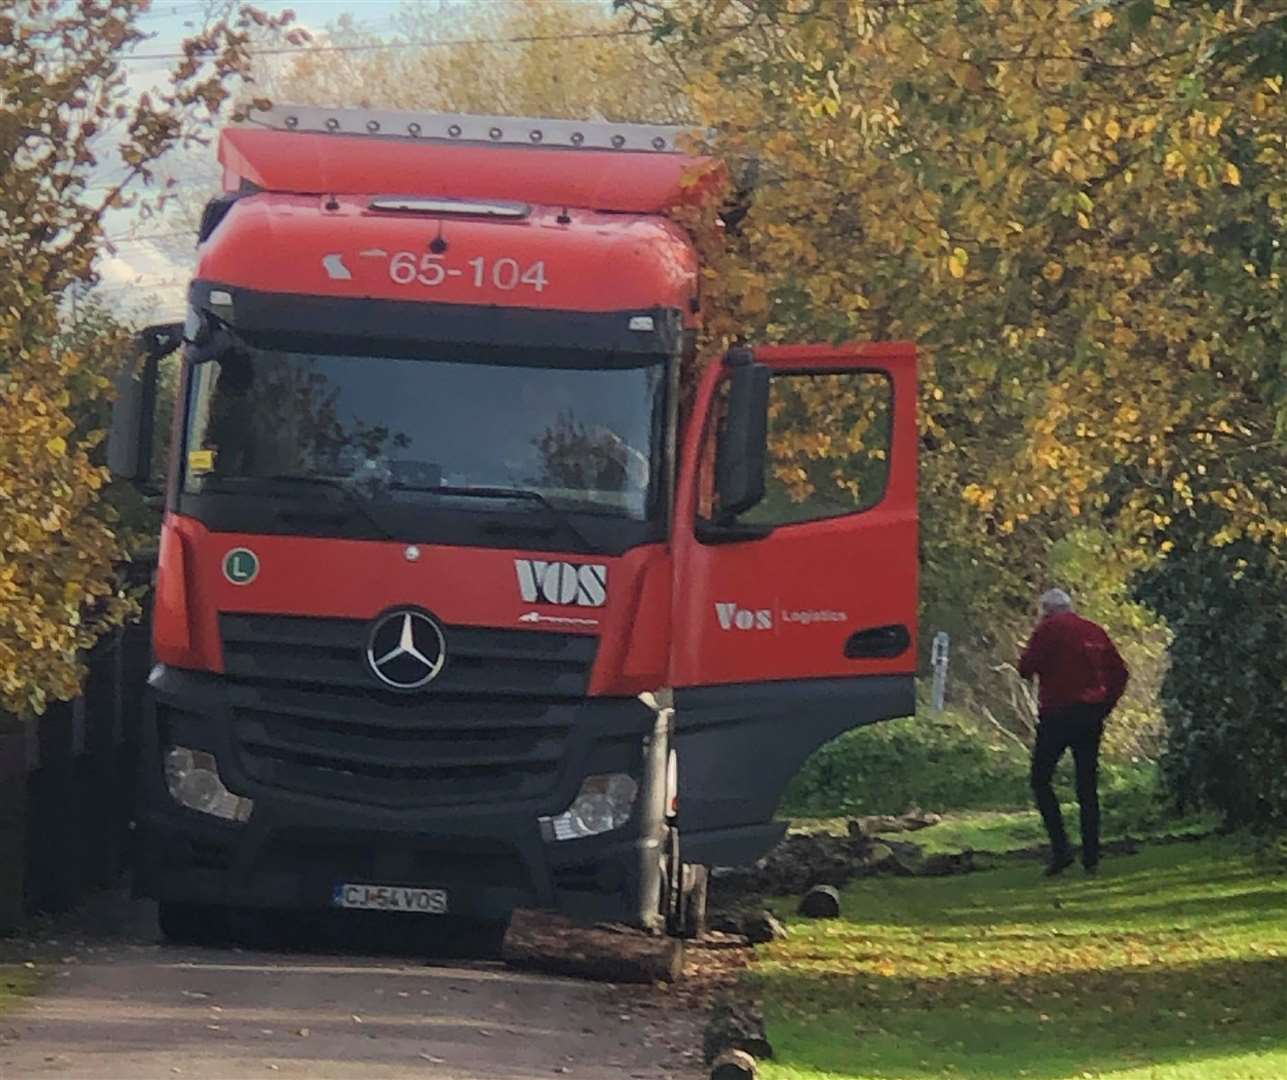 A HGV got stuck in Jacobs Lane causing severe delays for residents. Picture: Sharon Jackson